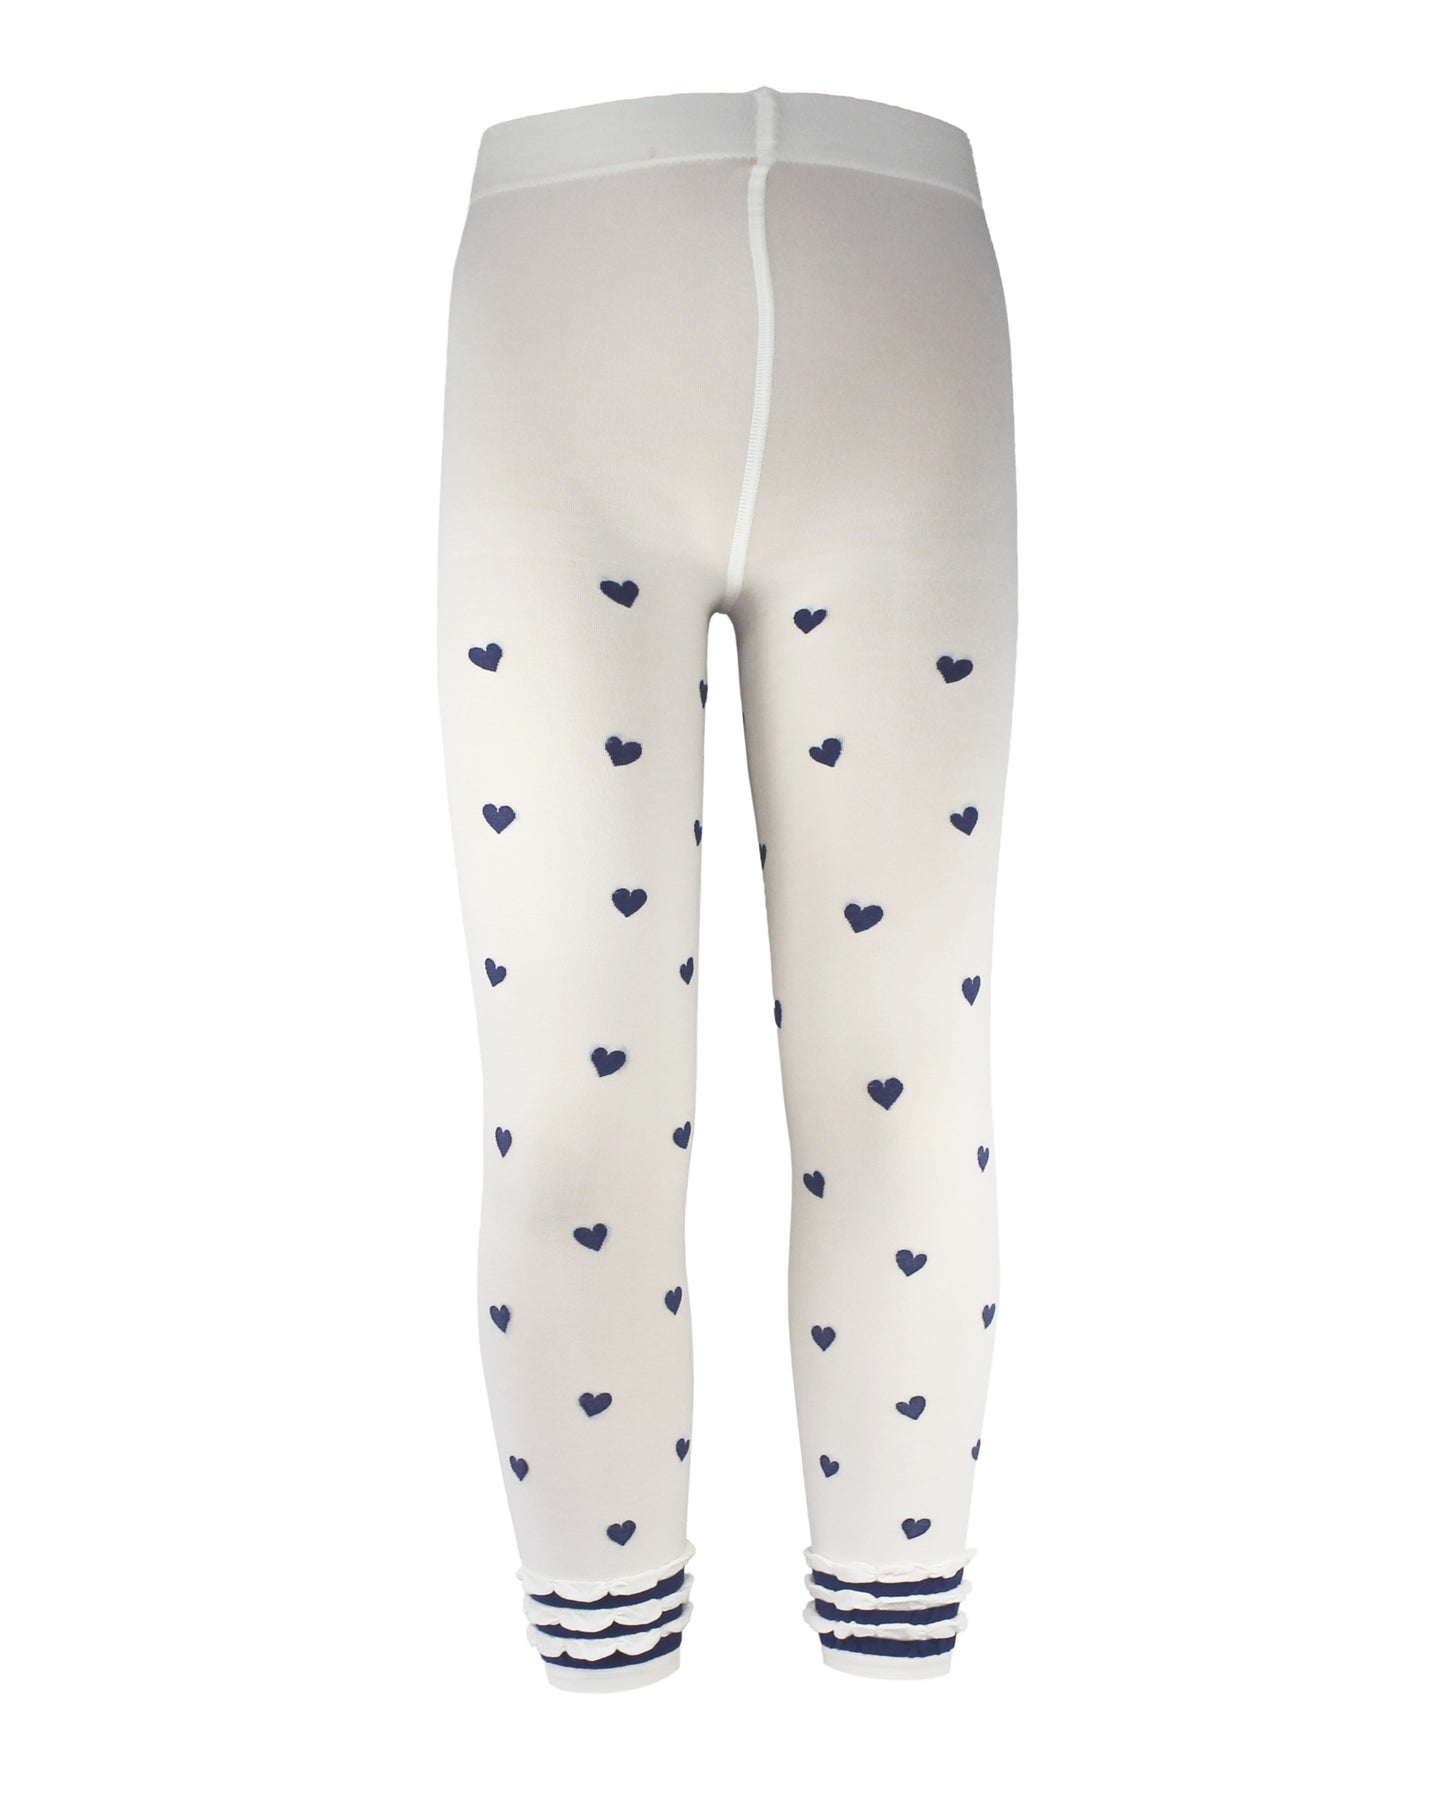 Omsa Fancy Leggings - Soft semi-opaque white kid's footless tights with an all over woven heart pattern in navy with a ruched striped cuff.